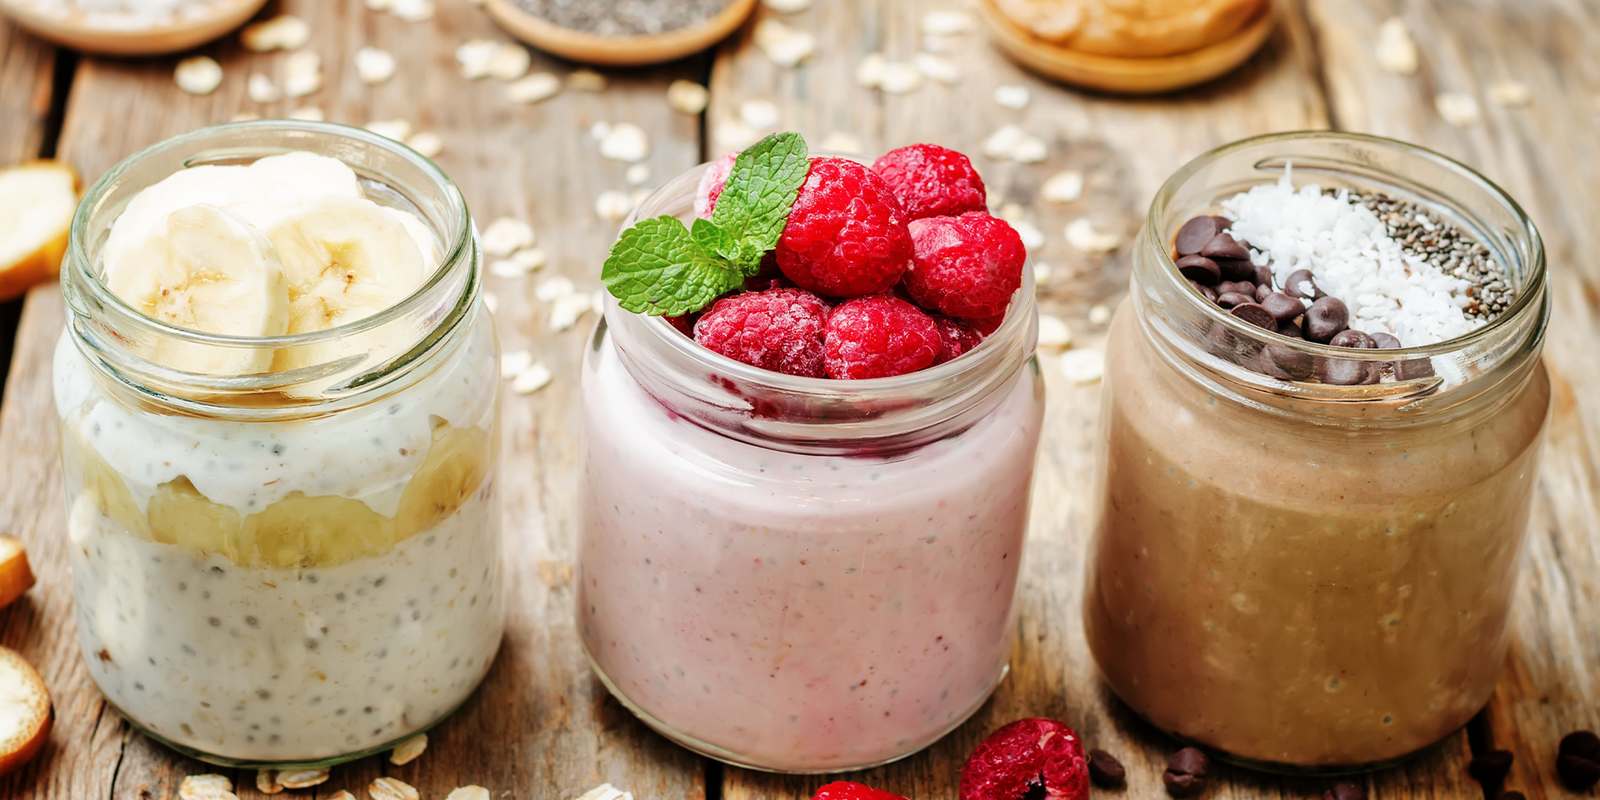 How to make protein overnight oats